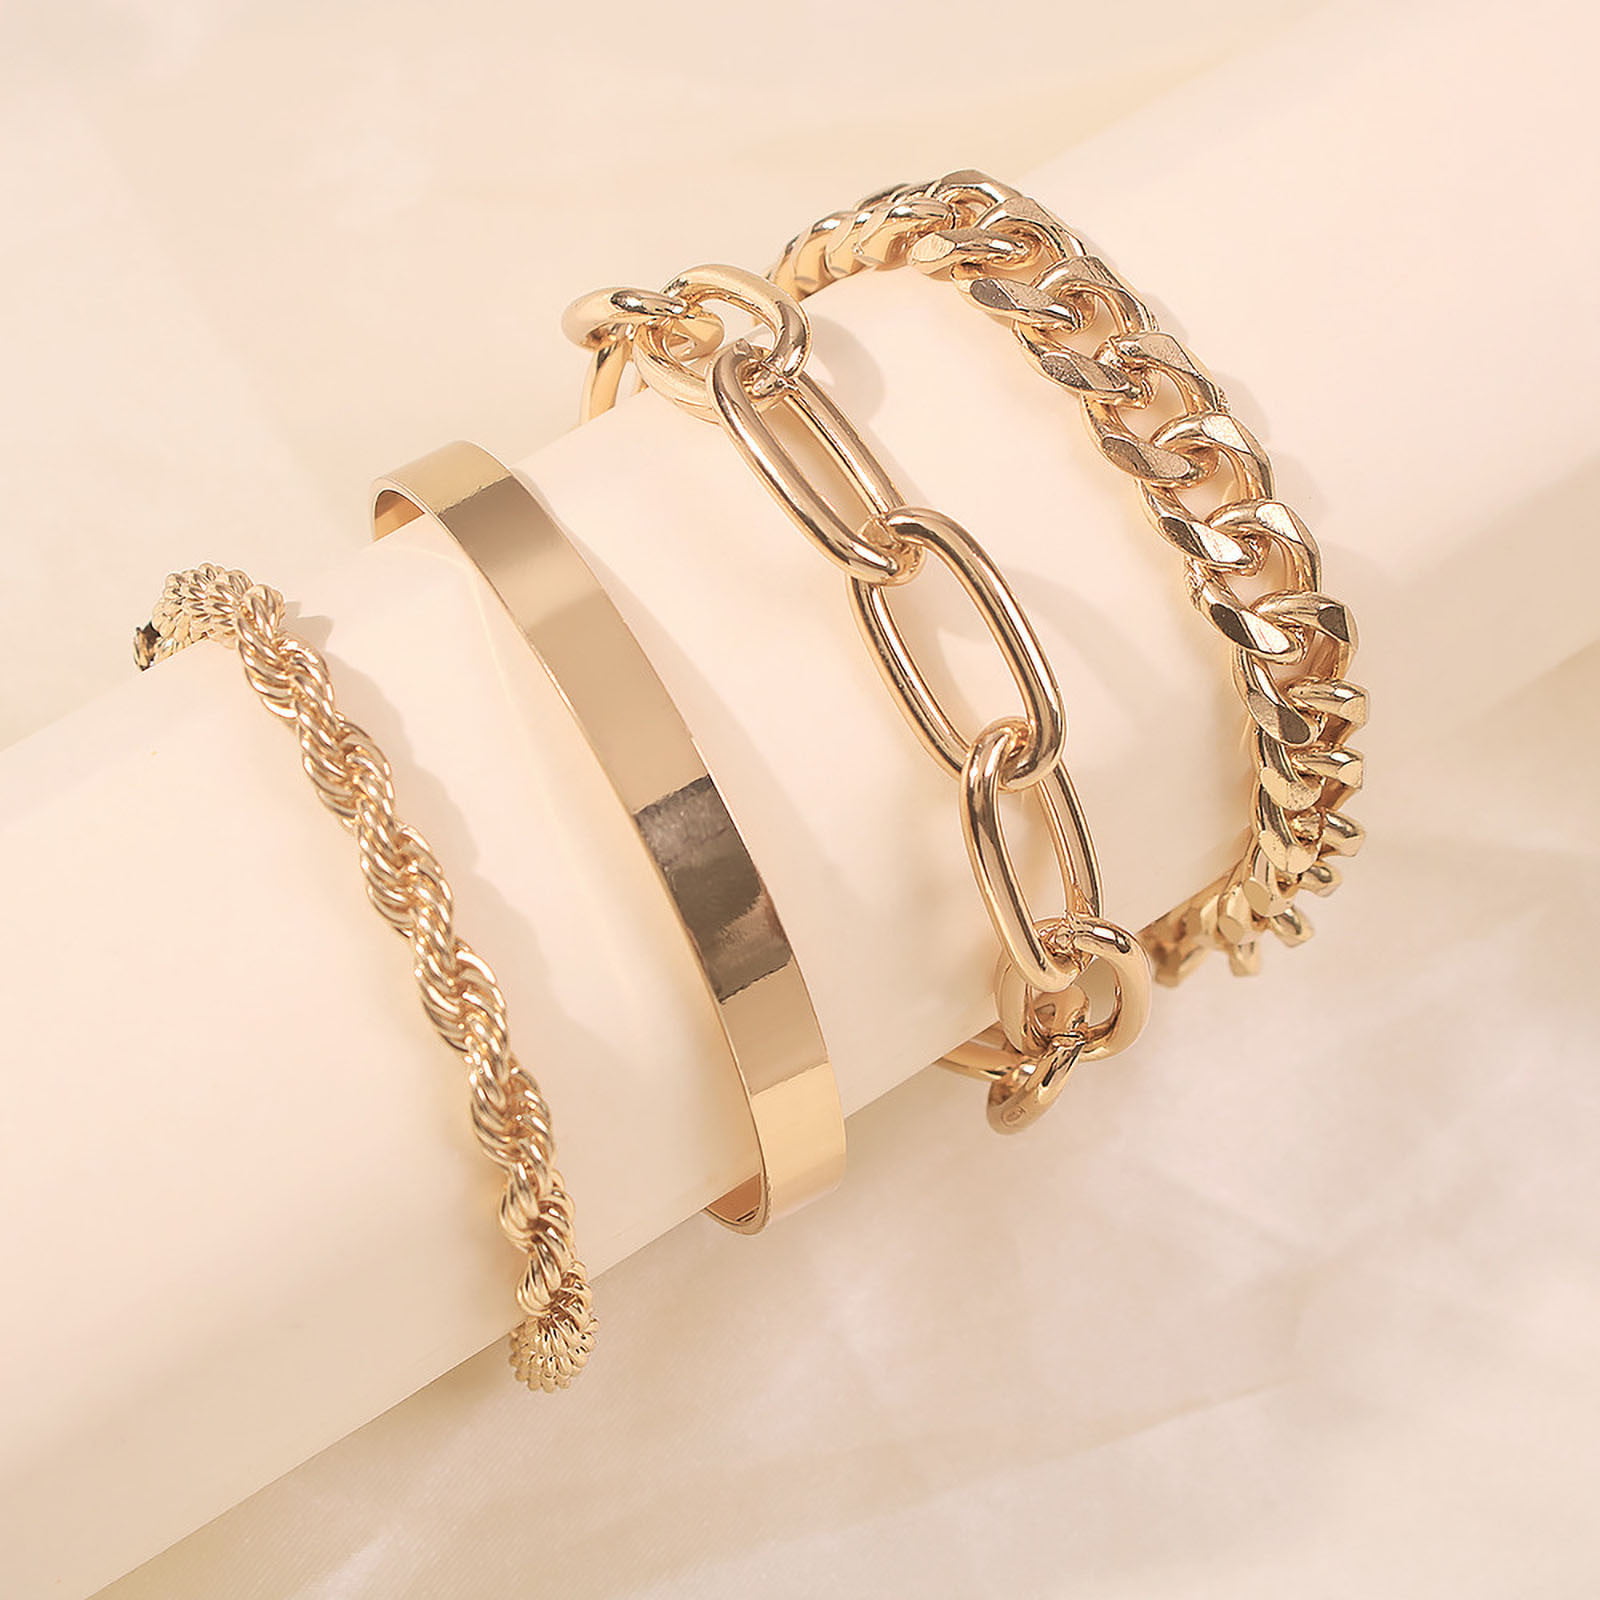 Details about   18CT Real white gold plated snake chain bracelet real white gold hearts gift box